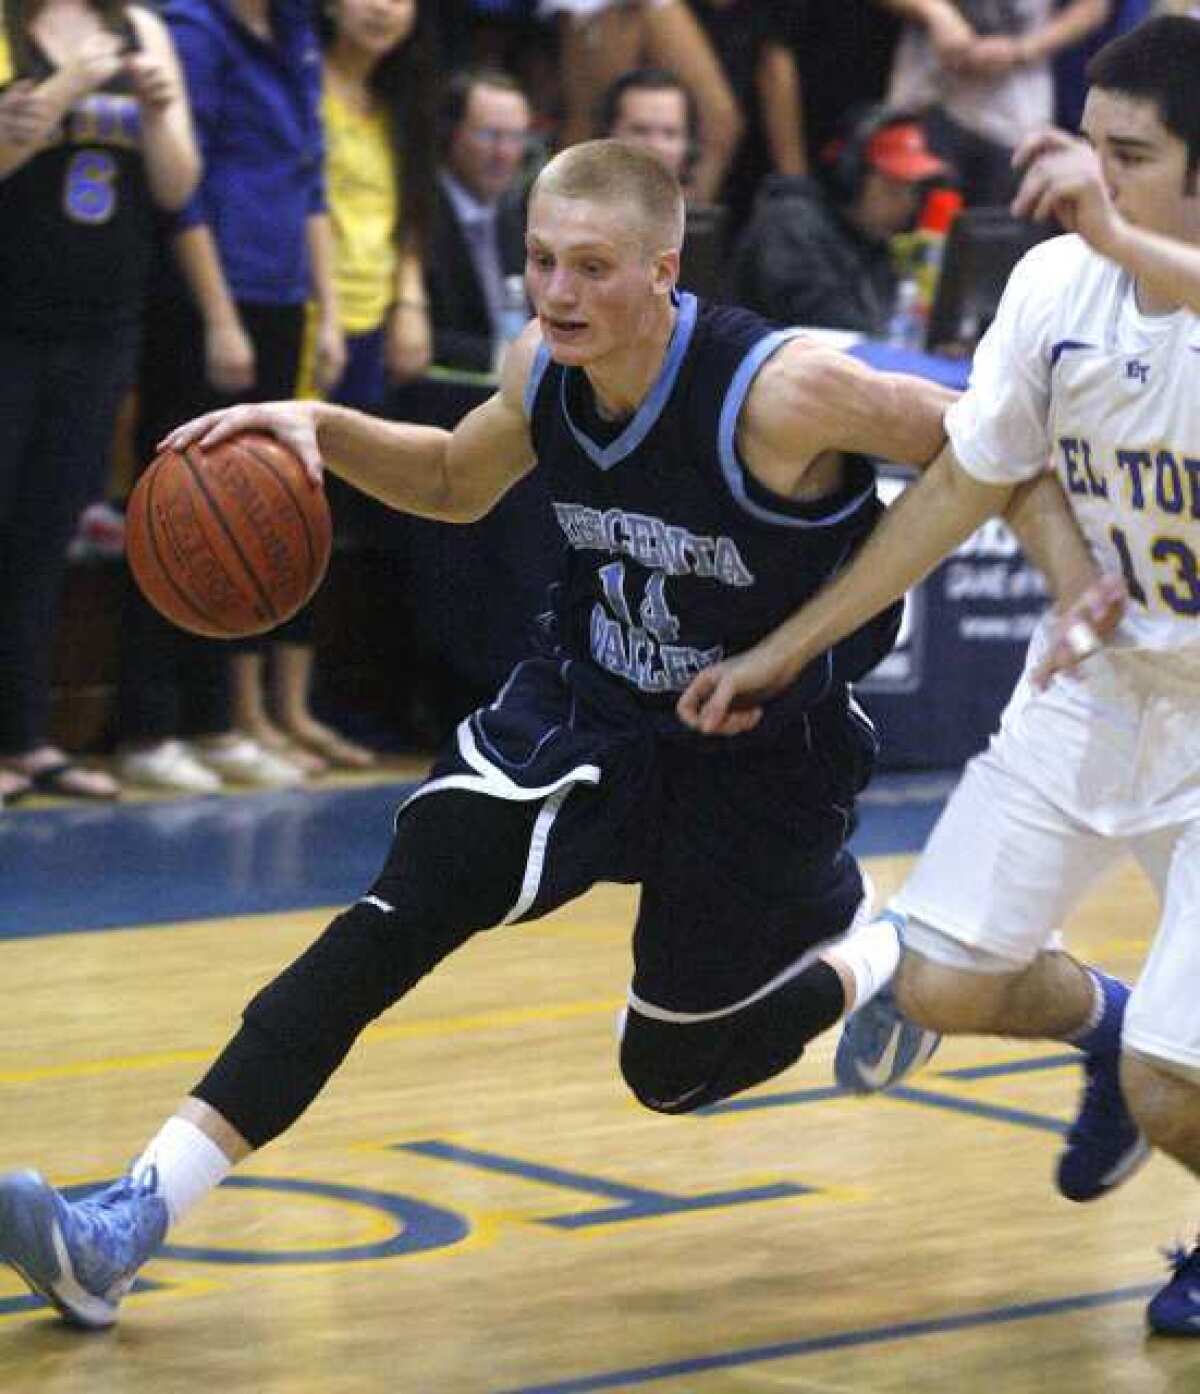 Crescenta Valley's Cole Currie drives to the basket against El Toro's Liam Skelly at El Toro High School in Lake Forest in a CIF Division 1A semifinal boys basketball game on Tuesday, February 26, 2013. (Tim Berger/Staff Photographer)